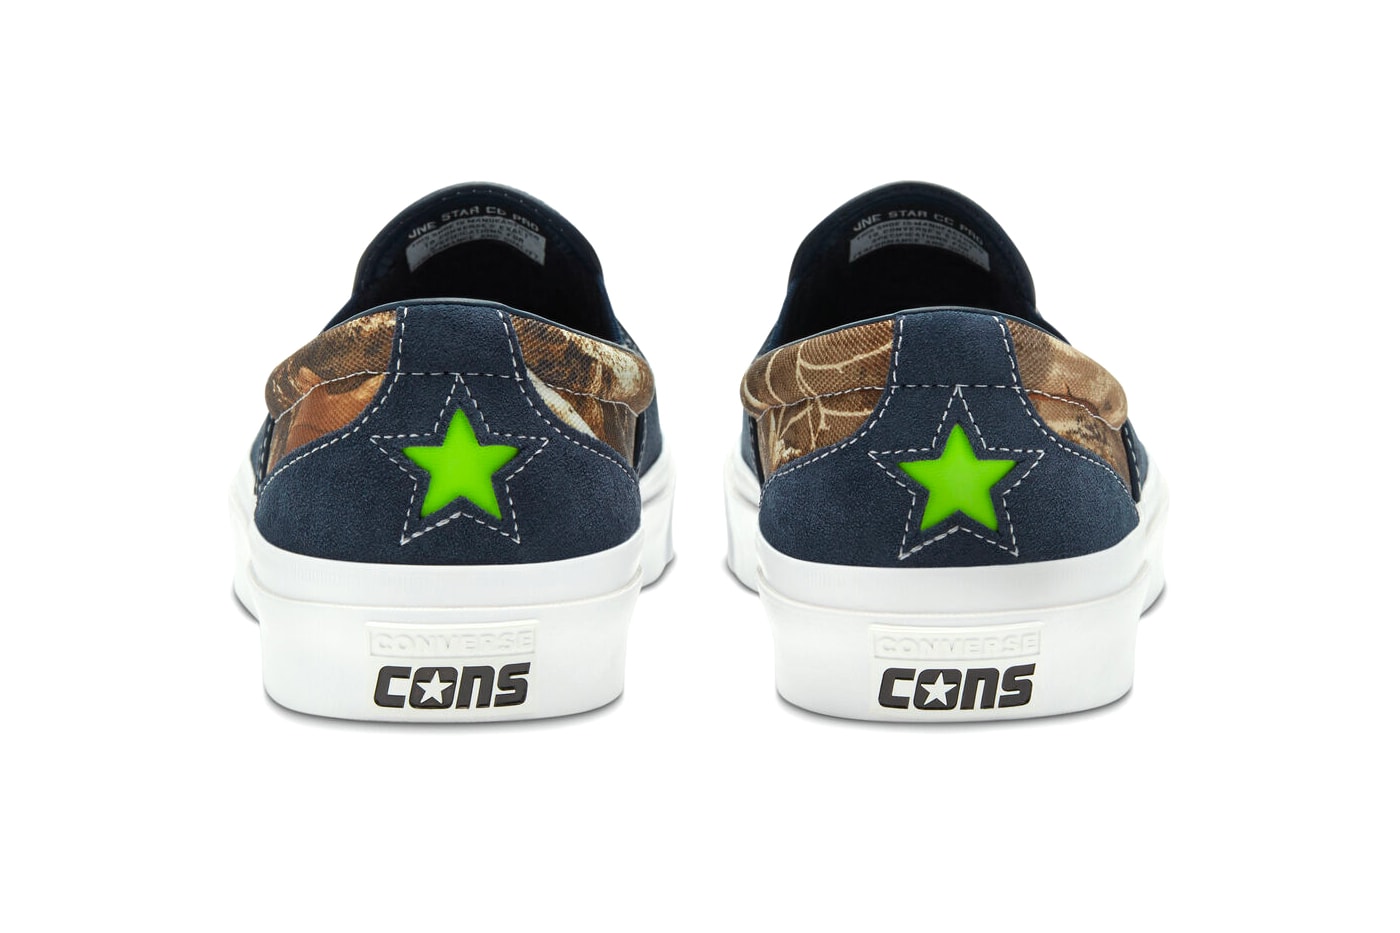 Converse One Star Slip Pro Realtree menswear streetwear spring summer 2020 collection ss20 shoes sneakers kicks slipons runners trainers